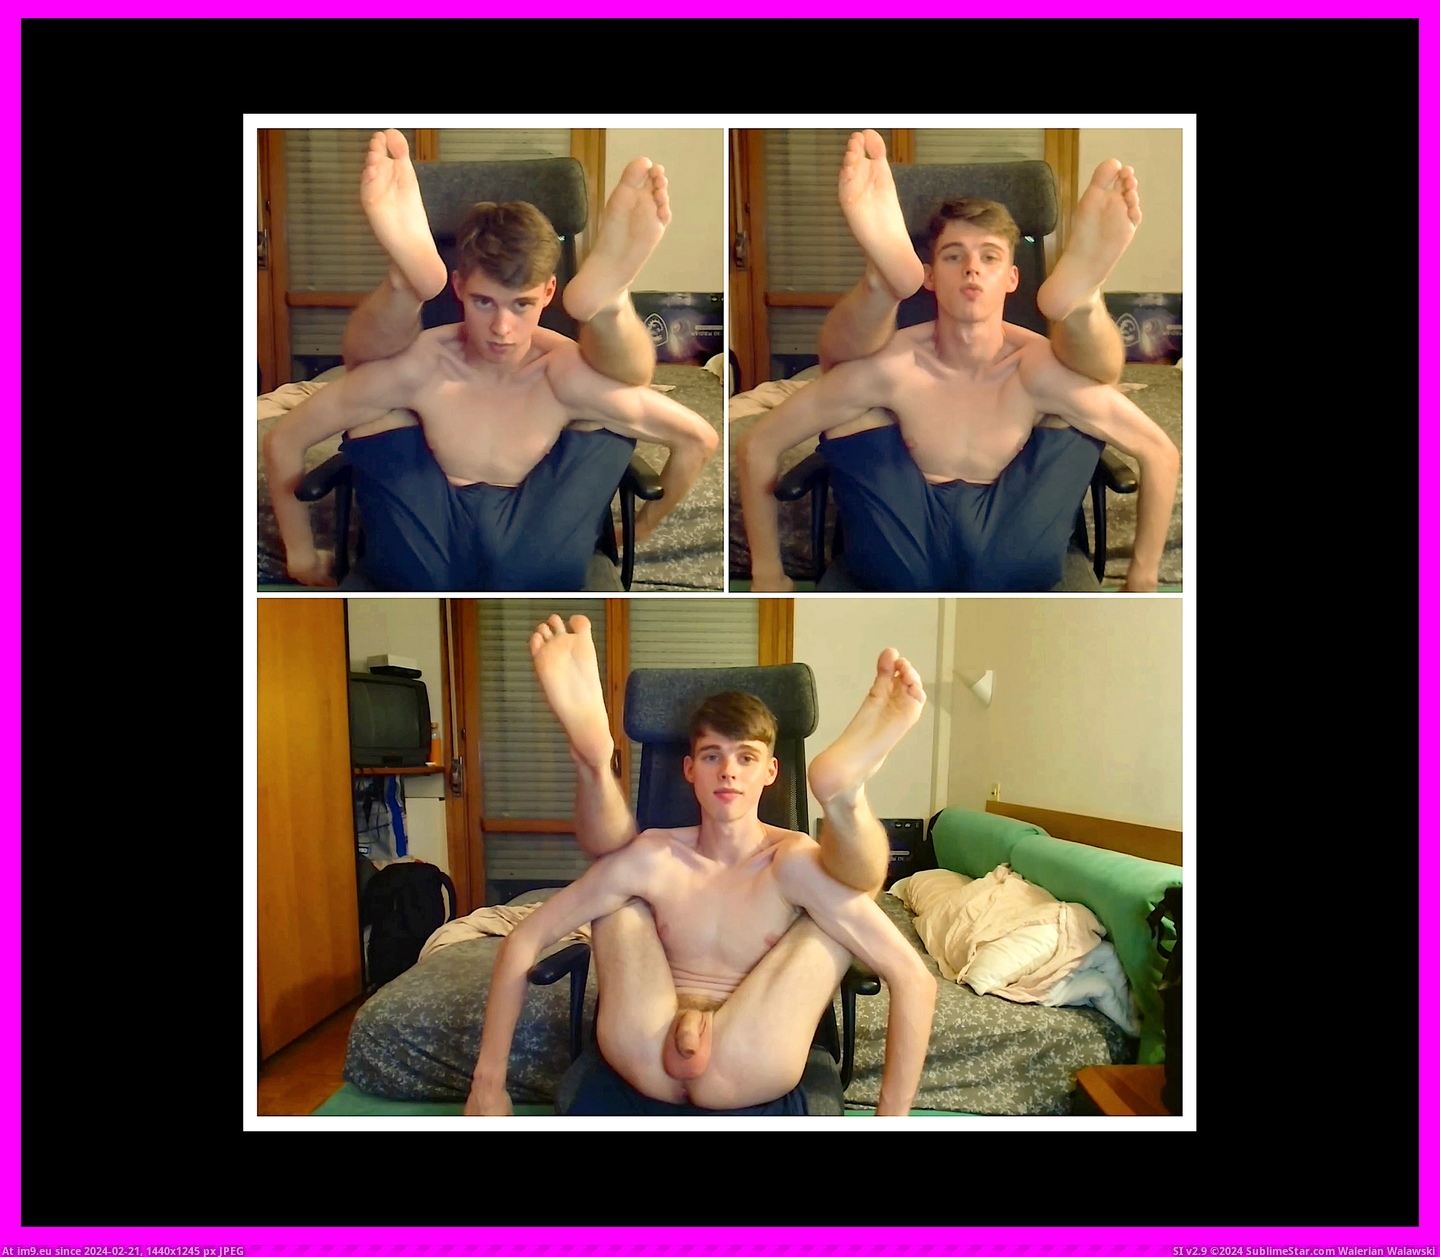 #Amateur #Teen #Nude #Cute #Boy #Unclothed #Flexible #Gay #Babe #Twink #Clothed Clothed Unclothedd Aamteur Flexible Babe Pic. (Image of album Instant Upload))